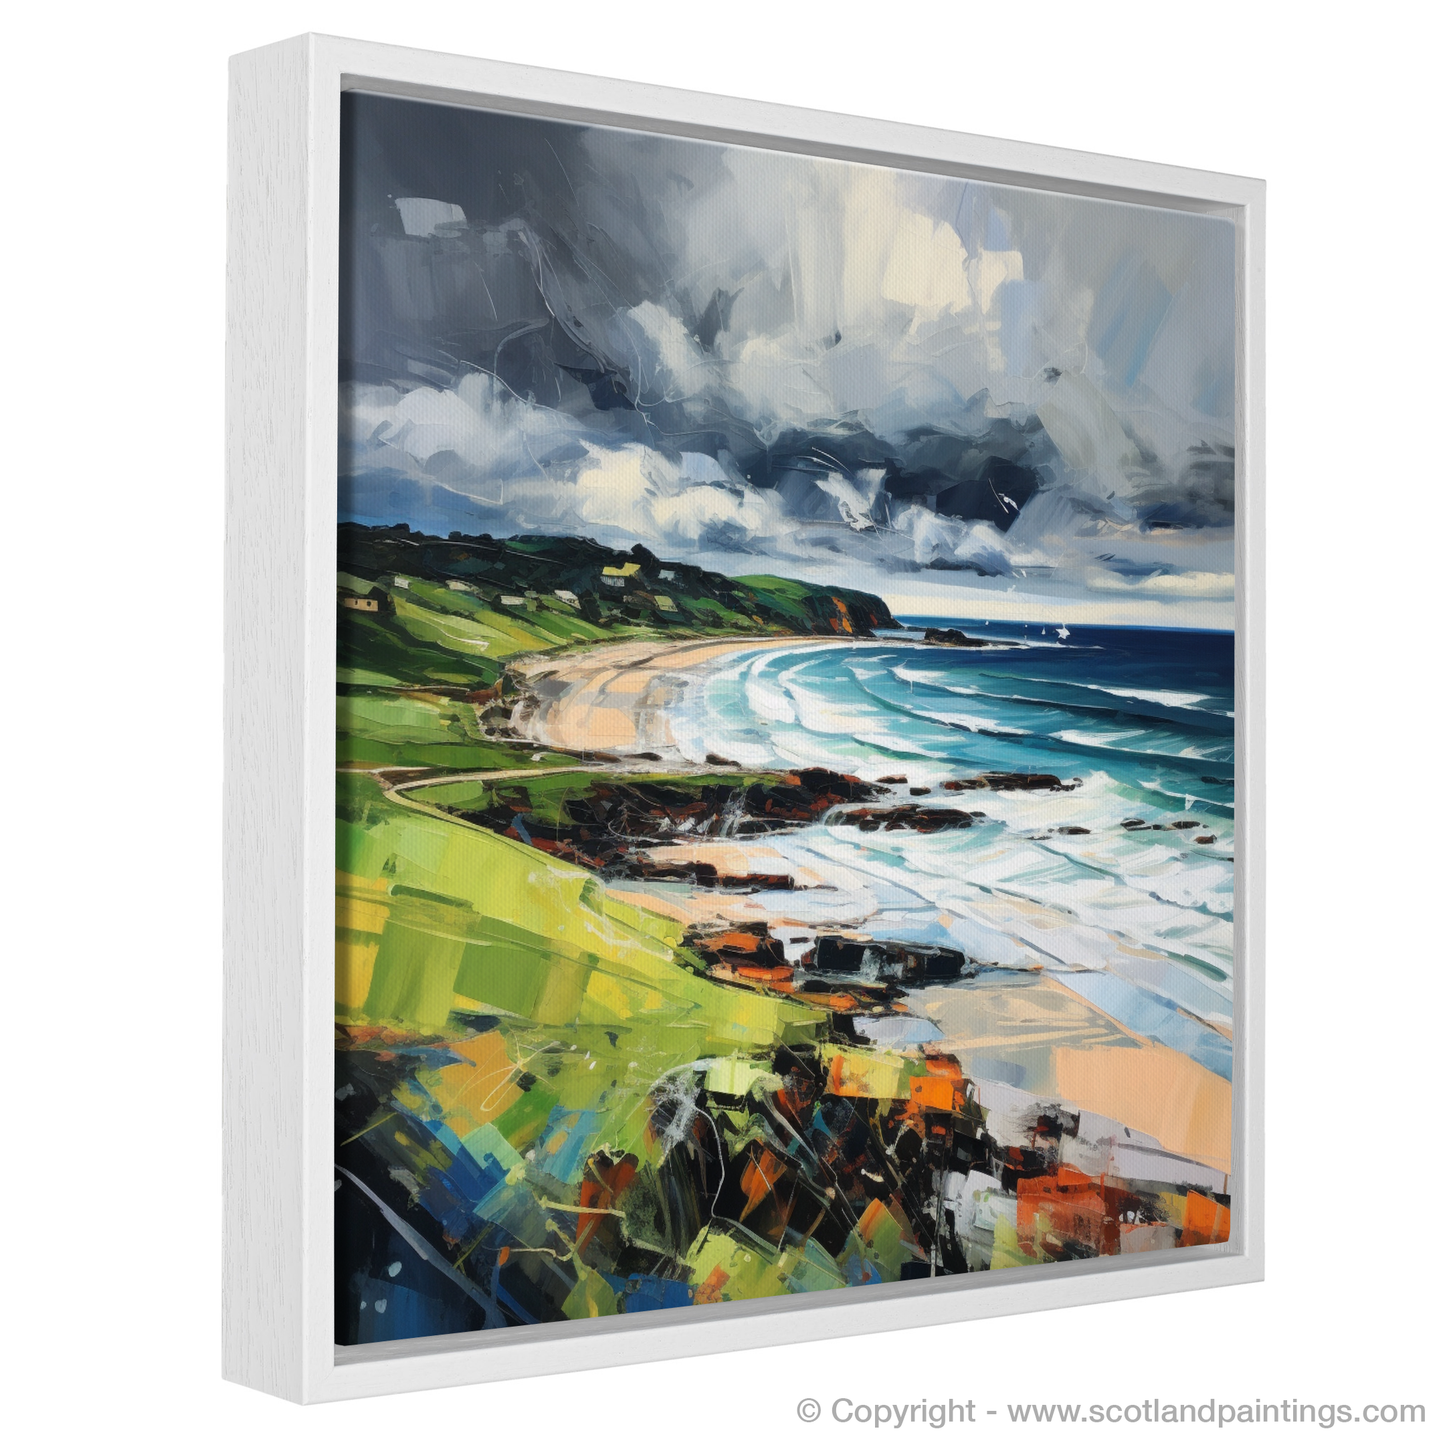 Painting and Art Print of Coldingham Bay with a stormy sky entitled "Storm over Coldingham Bay: An Expressionist Ode to Scottish Shores".